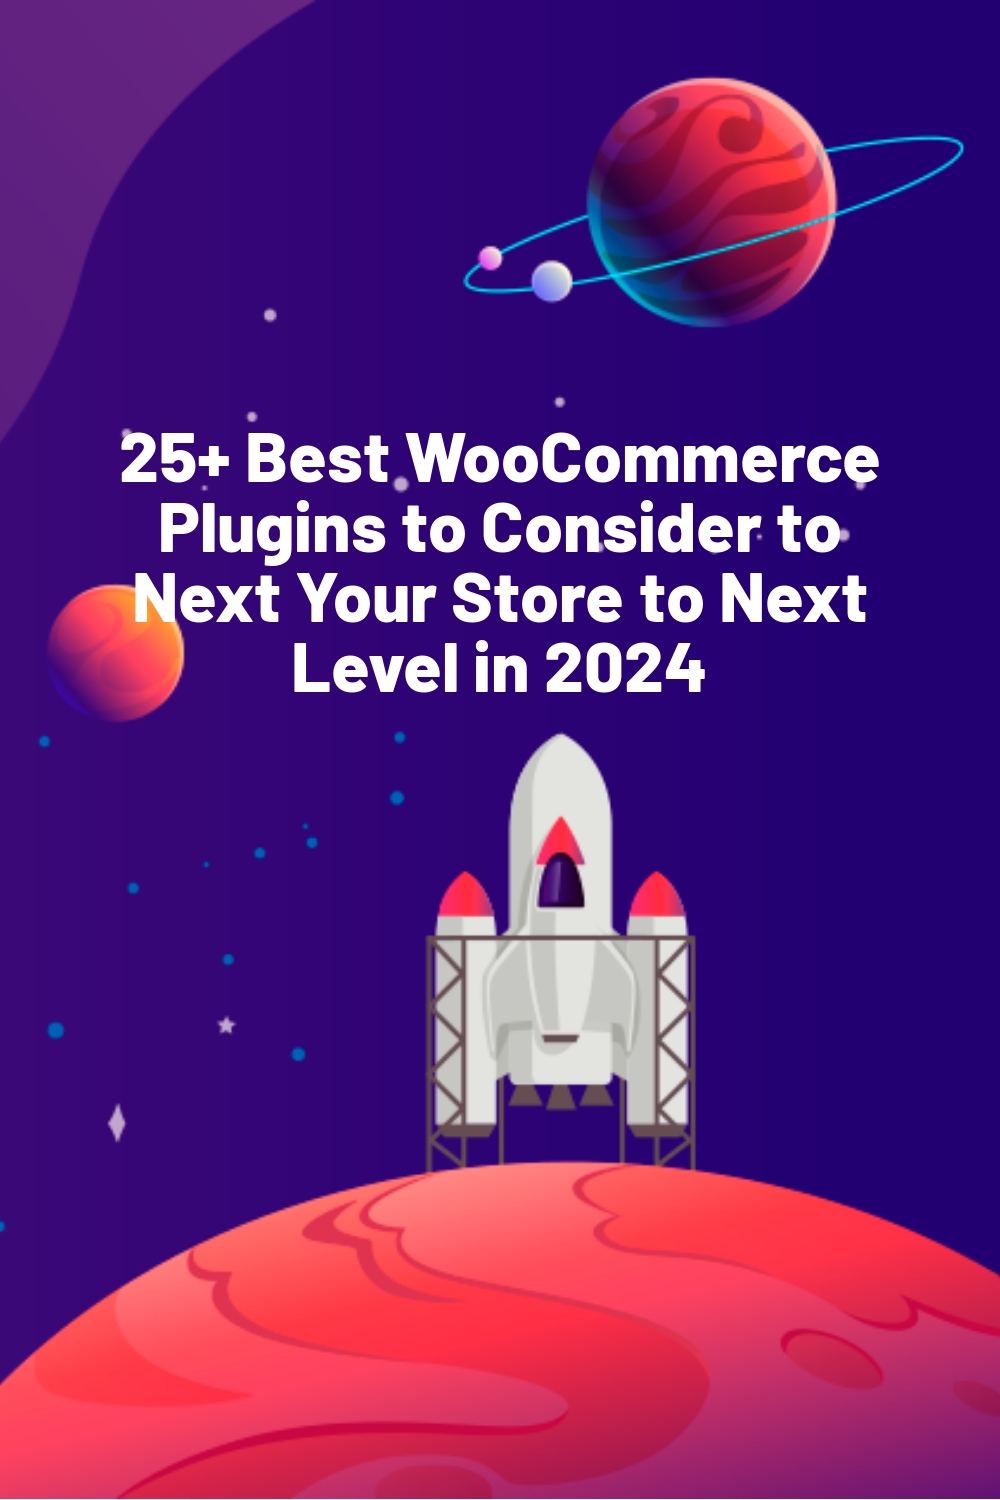 25+ Best WooCommerce Plugins to Consider to Next Your Store to Next Level in 2024